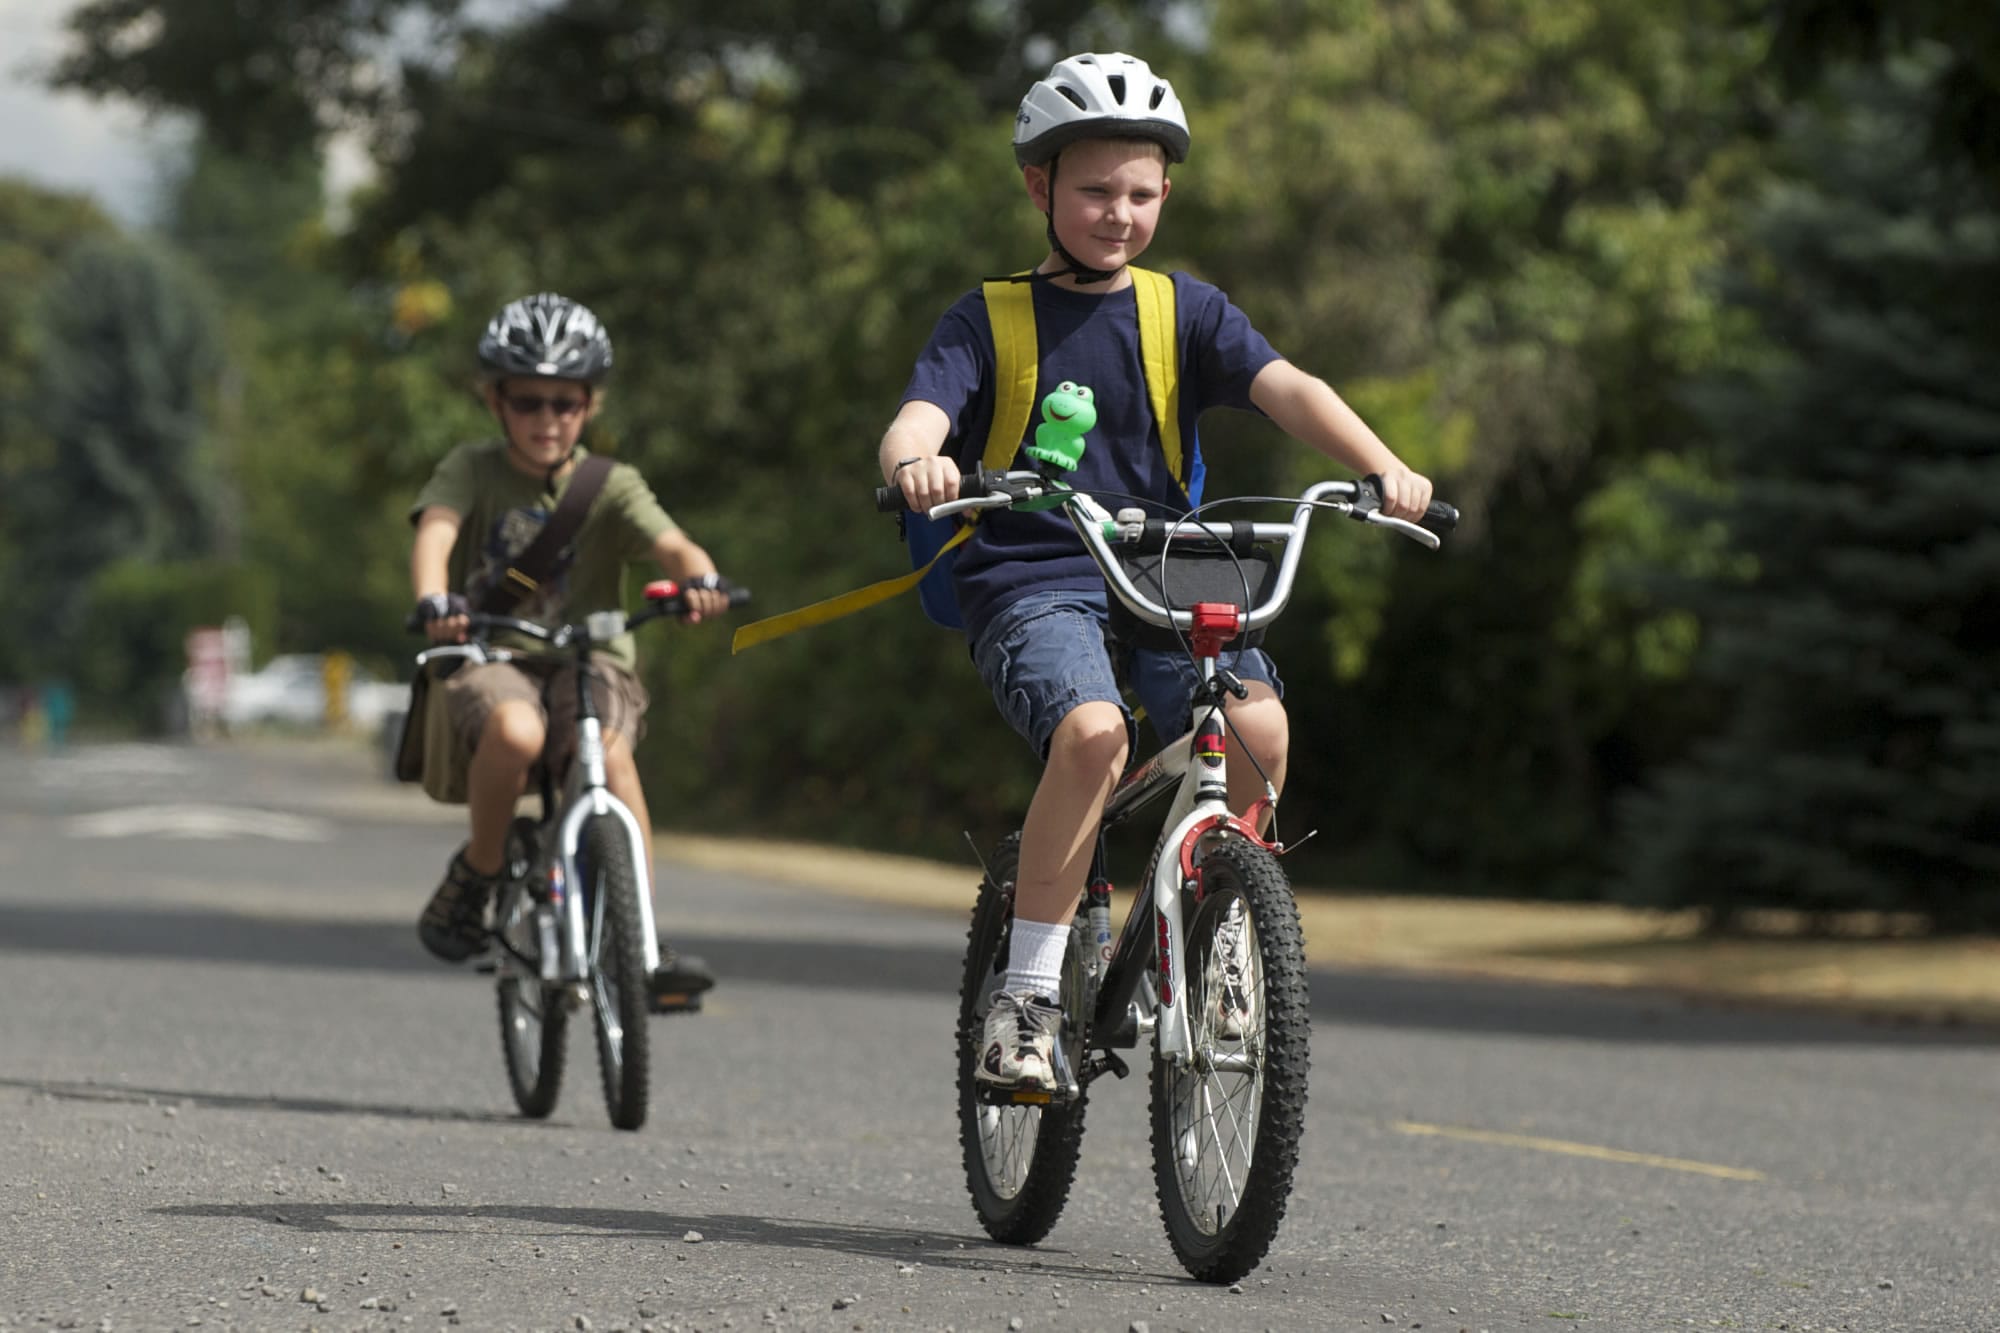 Nine-year-old pals Grant Myers, in front,  and Luke Seeley, behind, pedal Southeast Middle Way to deliver copies of The Weekly Neighbor. &quot;I like delivering real papers,&quot; said Seeley.